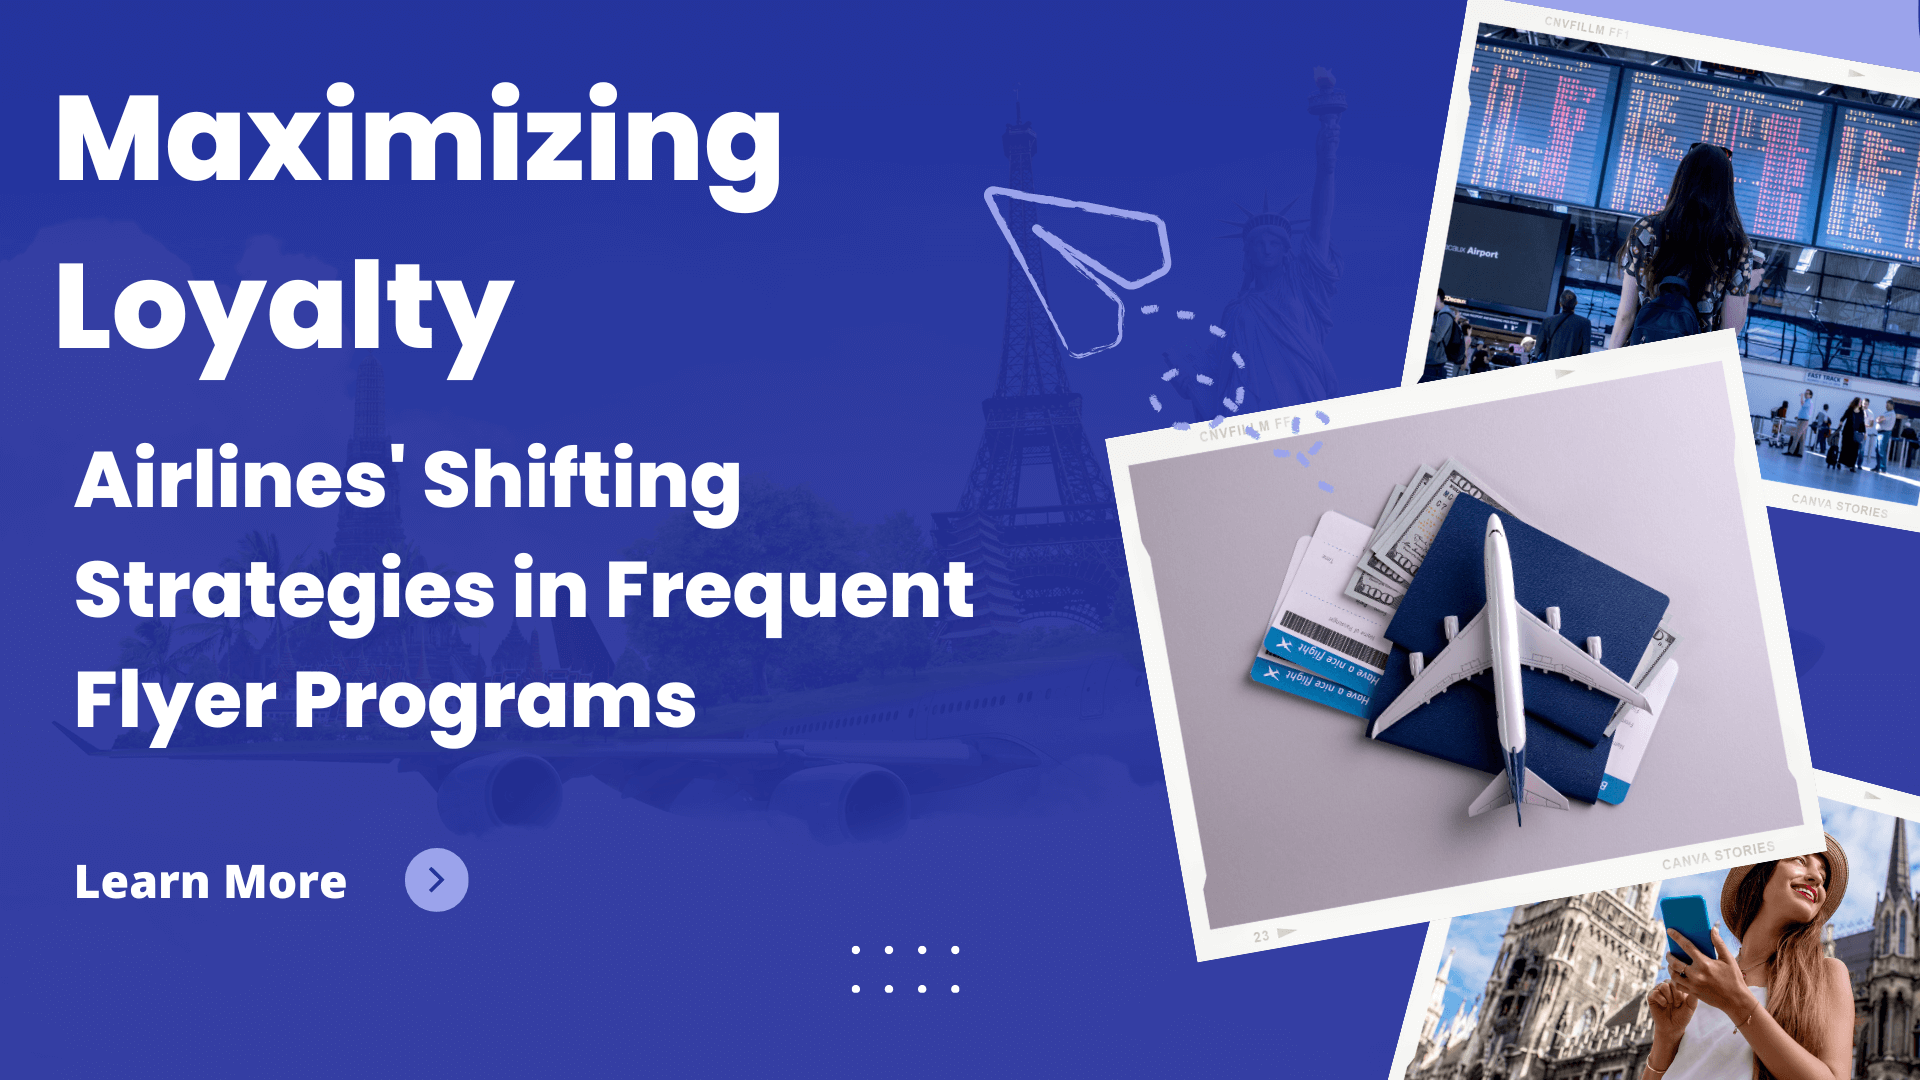 Maximizing Loyalty: Airlines' Shifting Strategies in Frequent Flyer Programs